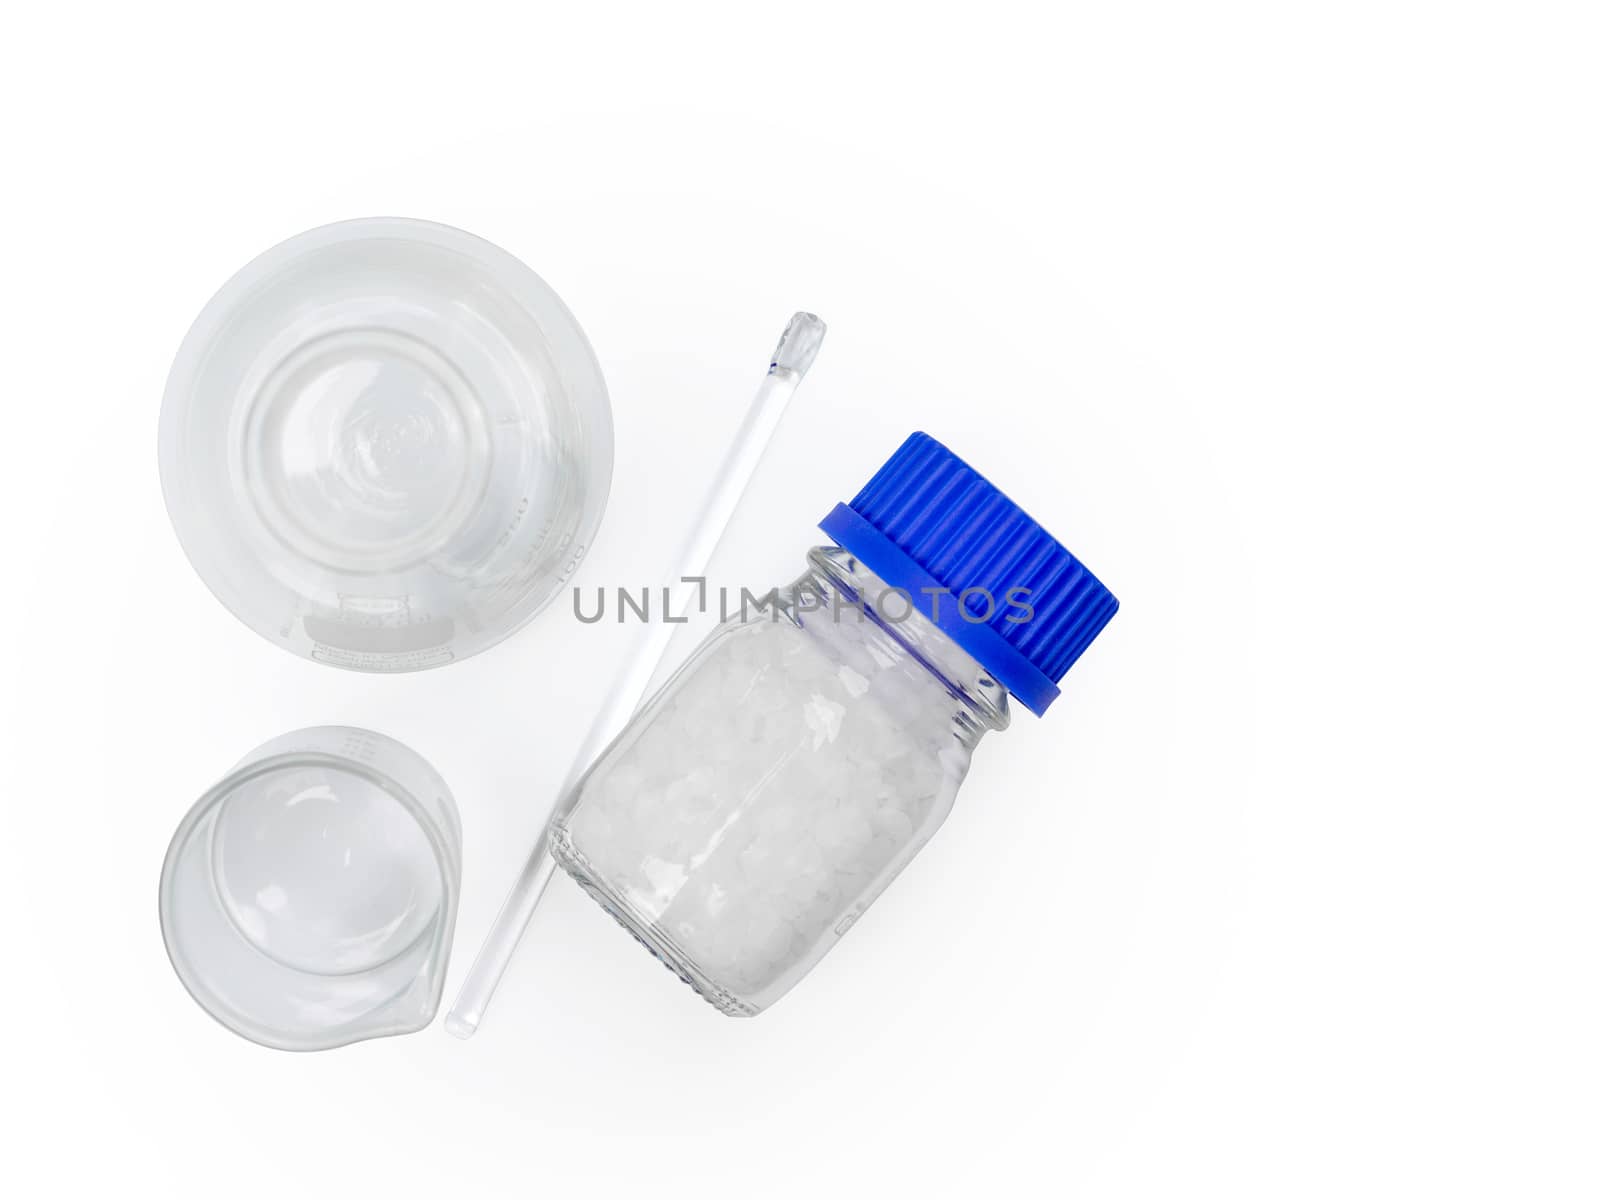 Microcrystalline wax in glass container. Chemical ingredient for Cosmetics & Toiletries product. Stirring Rod, Beaker, Solvent botton, Erlenmeyer flask